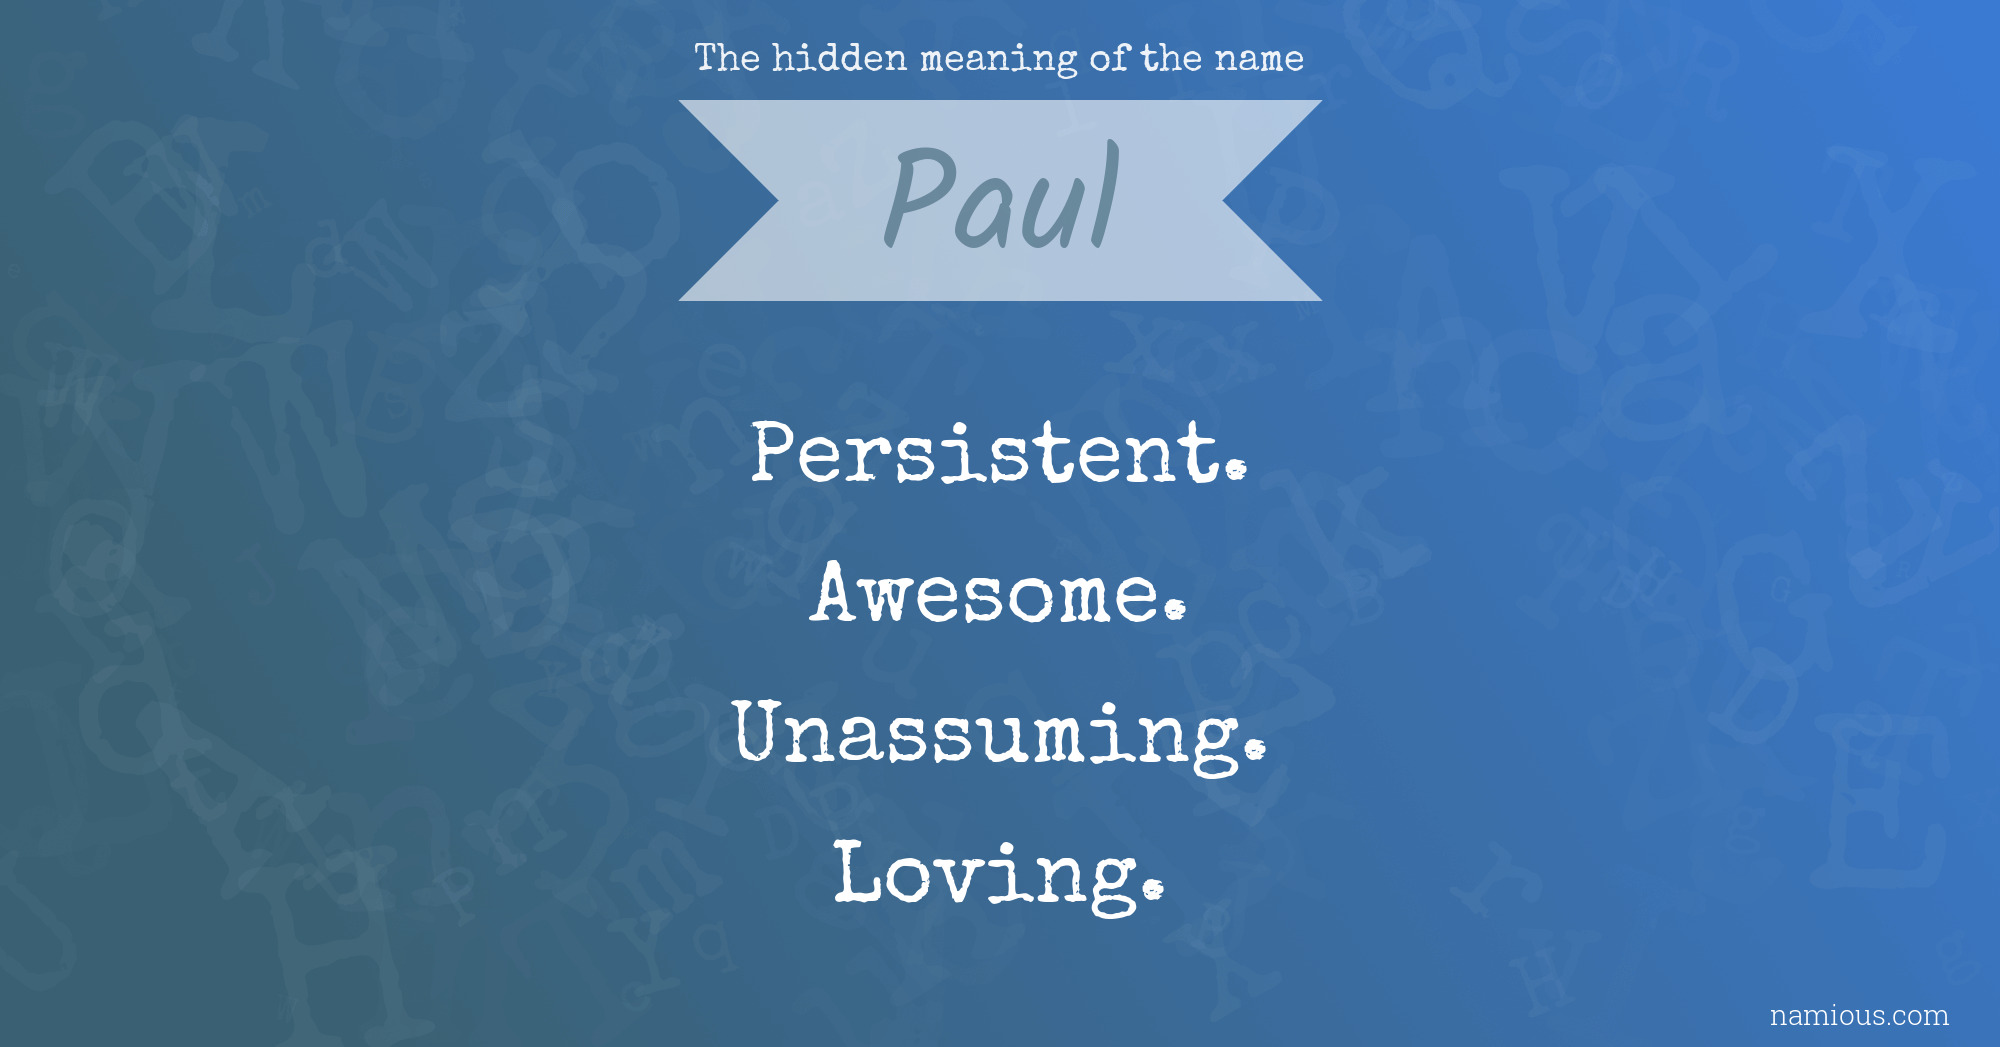 The hidden meaning of the name Paul